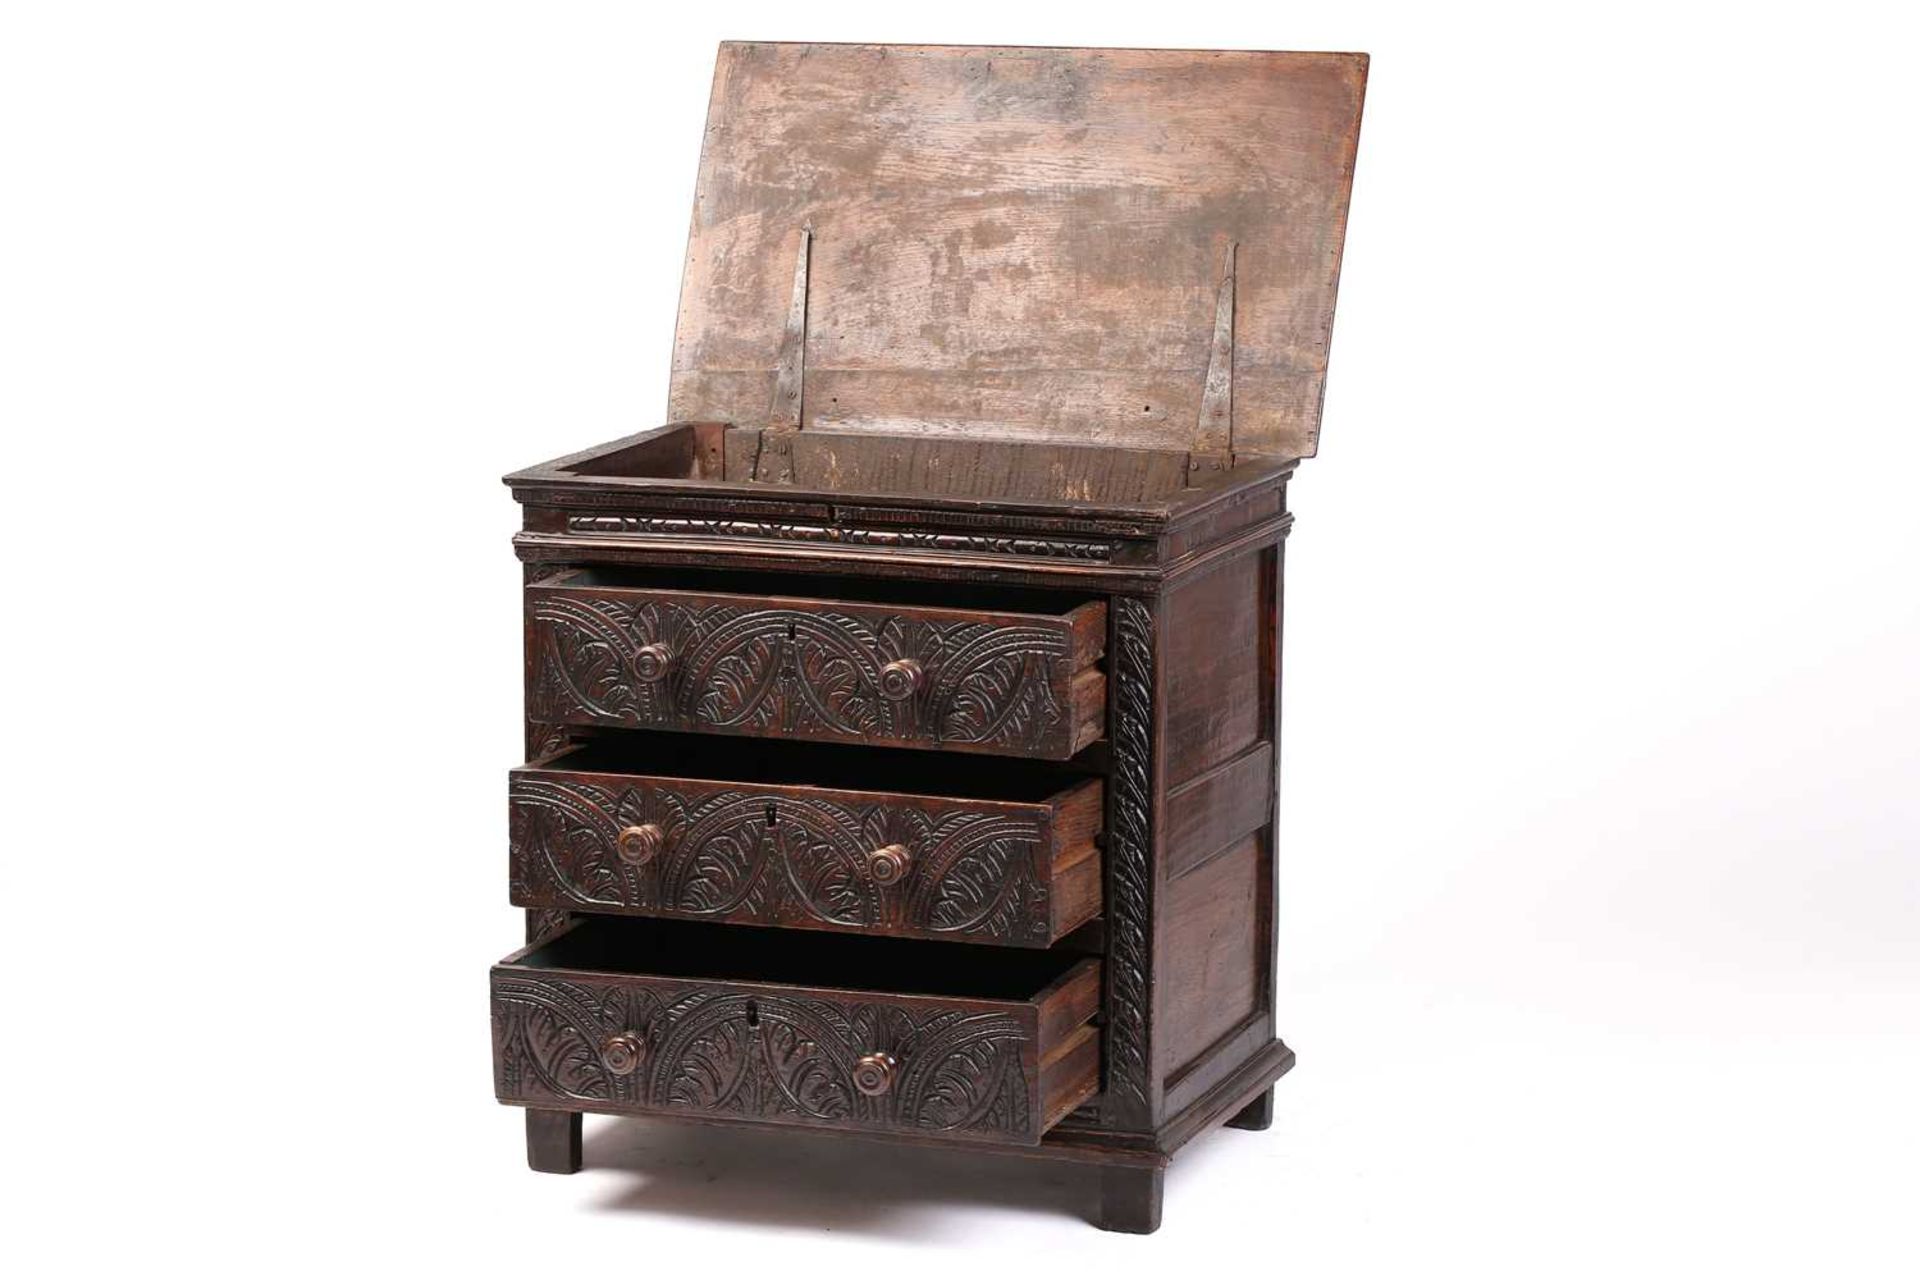 A carved oak 17th-century style three-drawer chest (17th century period timber and later, re- - Image 3 of 9